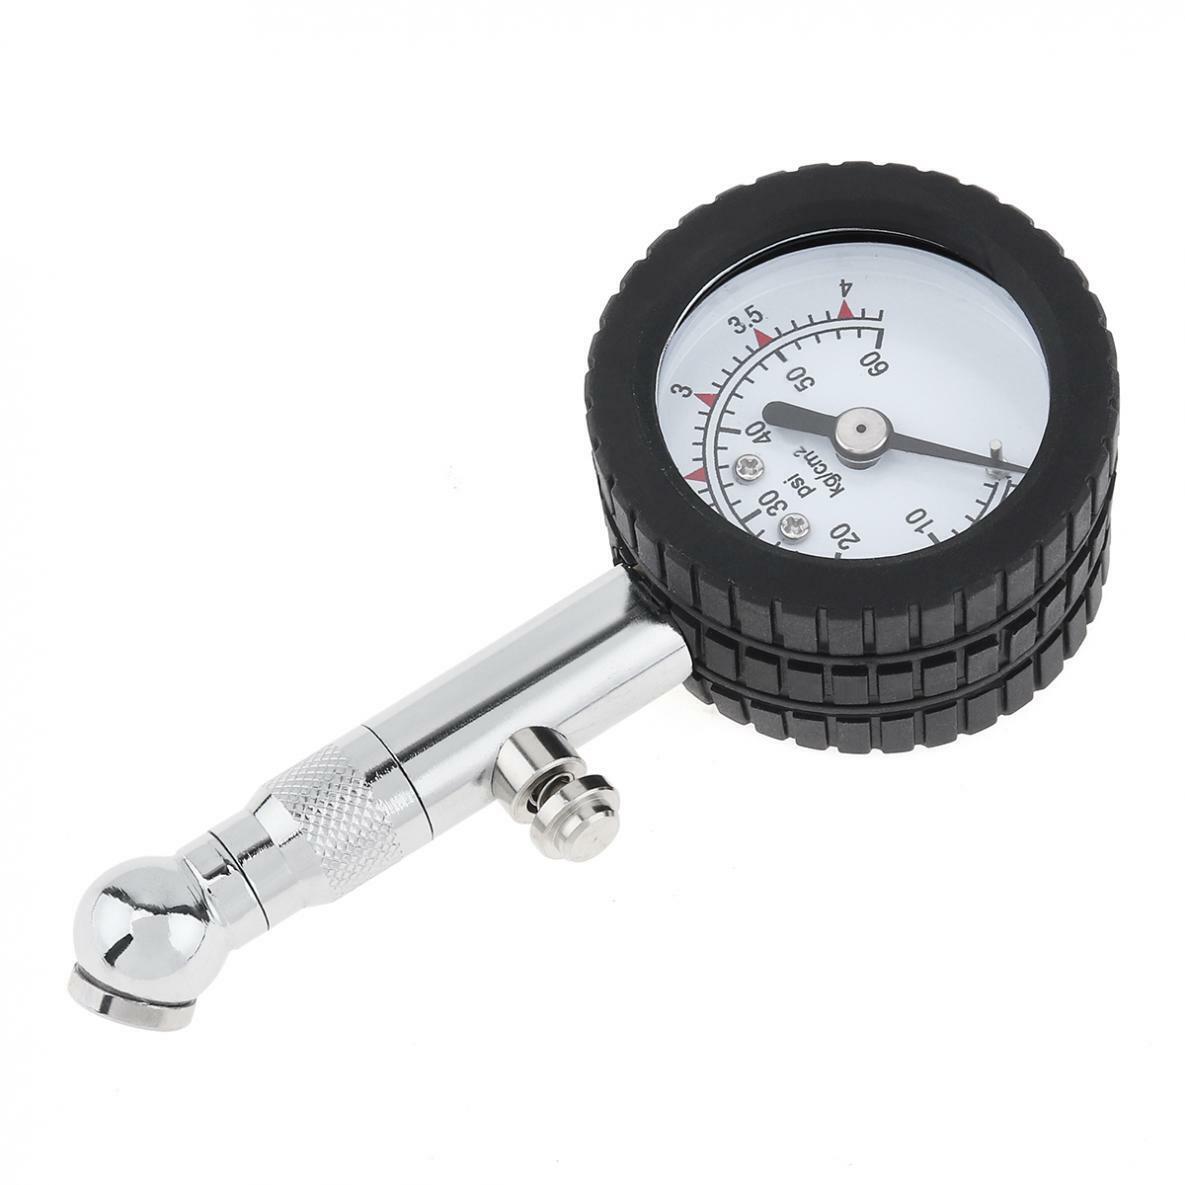 YD-6025 Air Tire Pressure Gauge High Accuracy Mechanical Up to 60 PSI Dial Meter